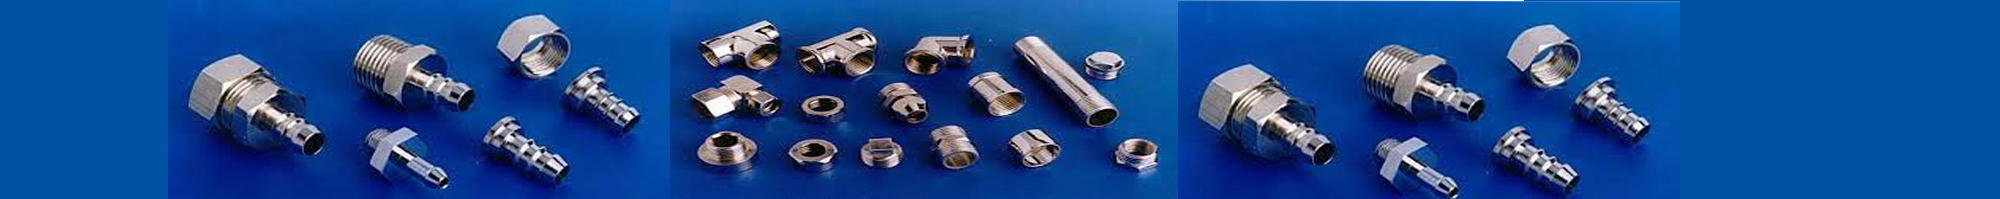 Nickel 200 / 201 Outlet Fittings supplier